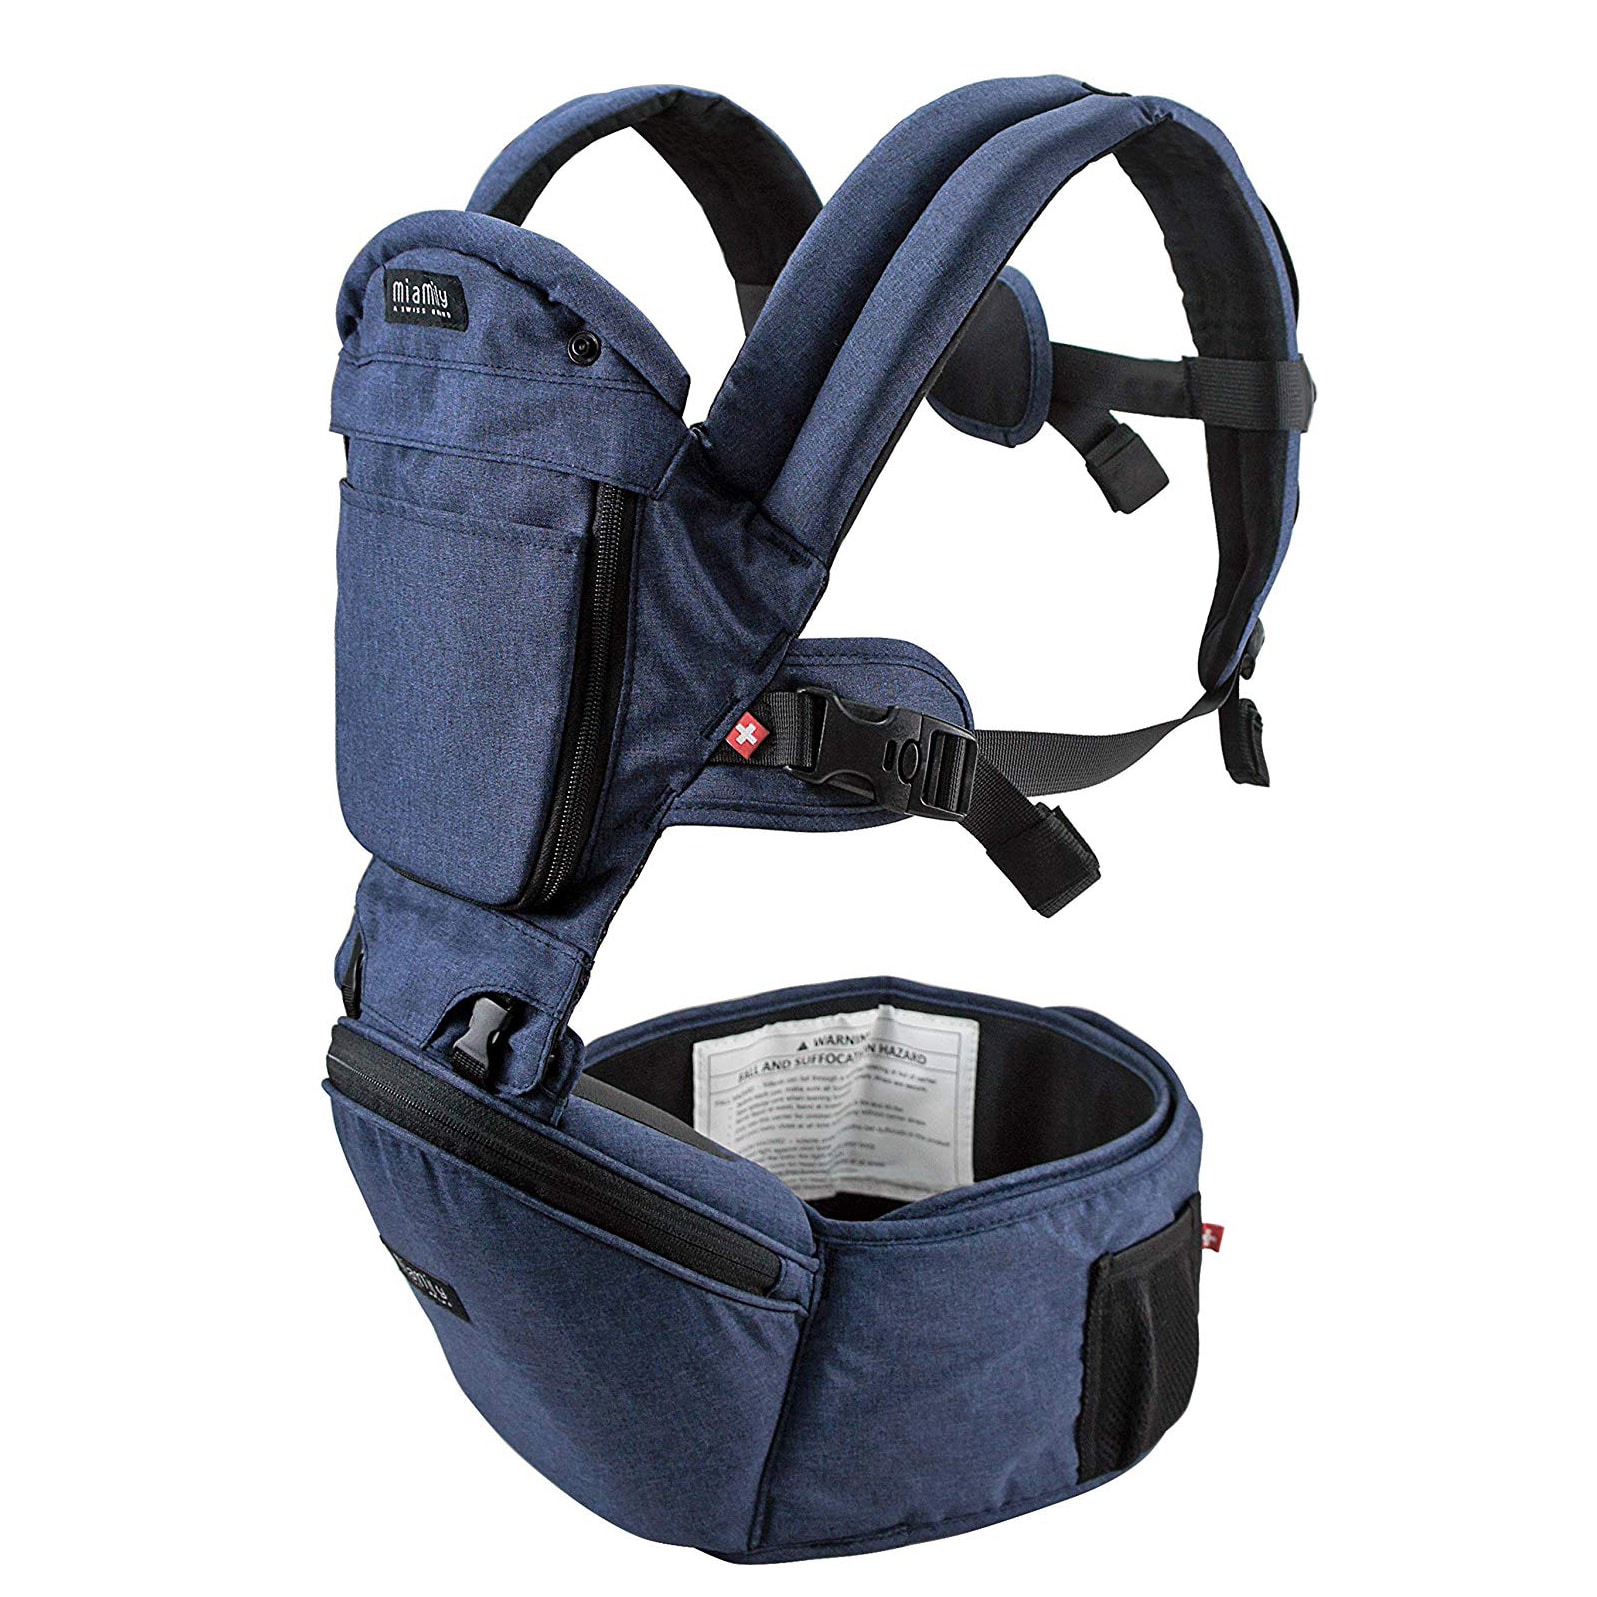 Top 10 Best Baby Carriers in 2021 Reviews Guide